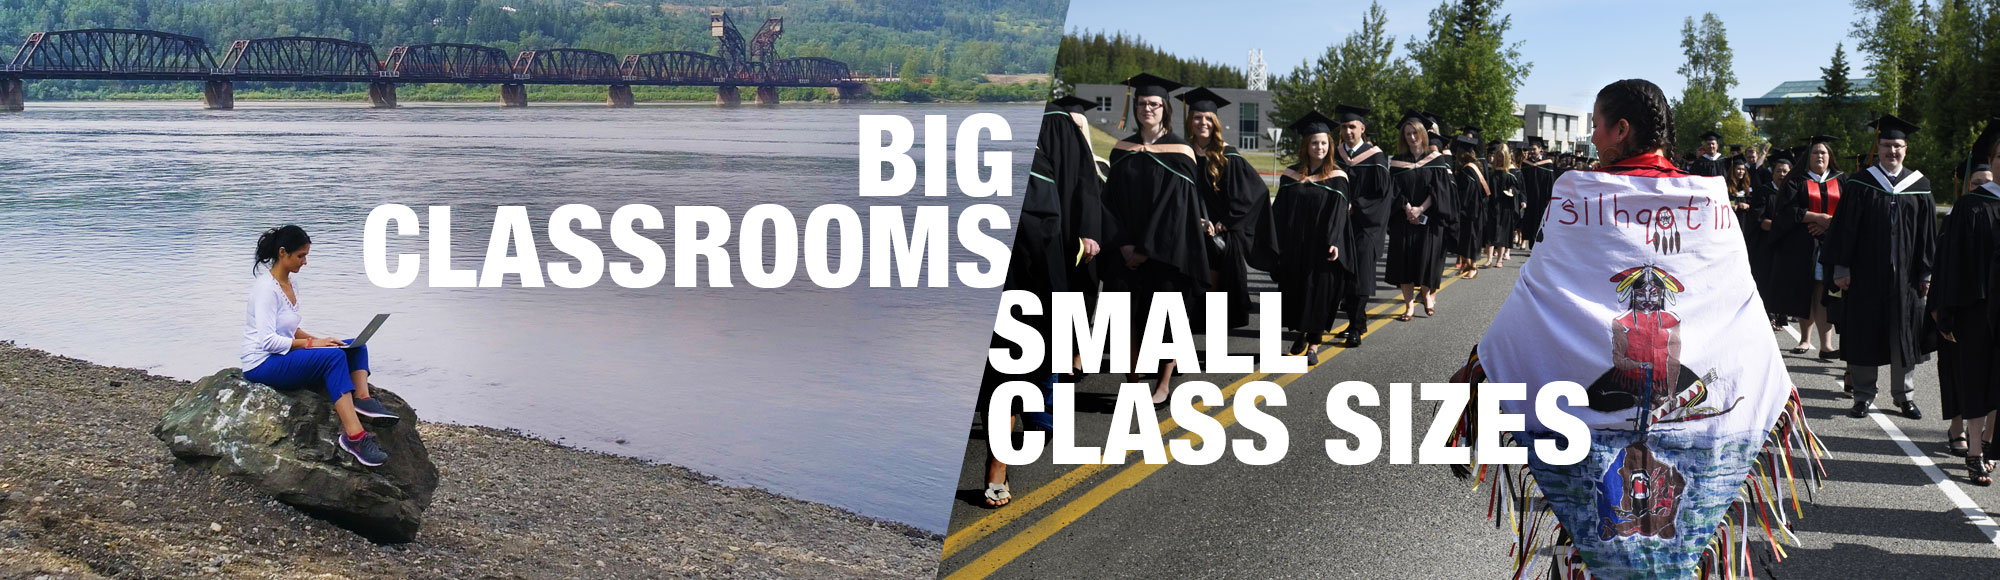 Big Classrooms - Small Class Sizes